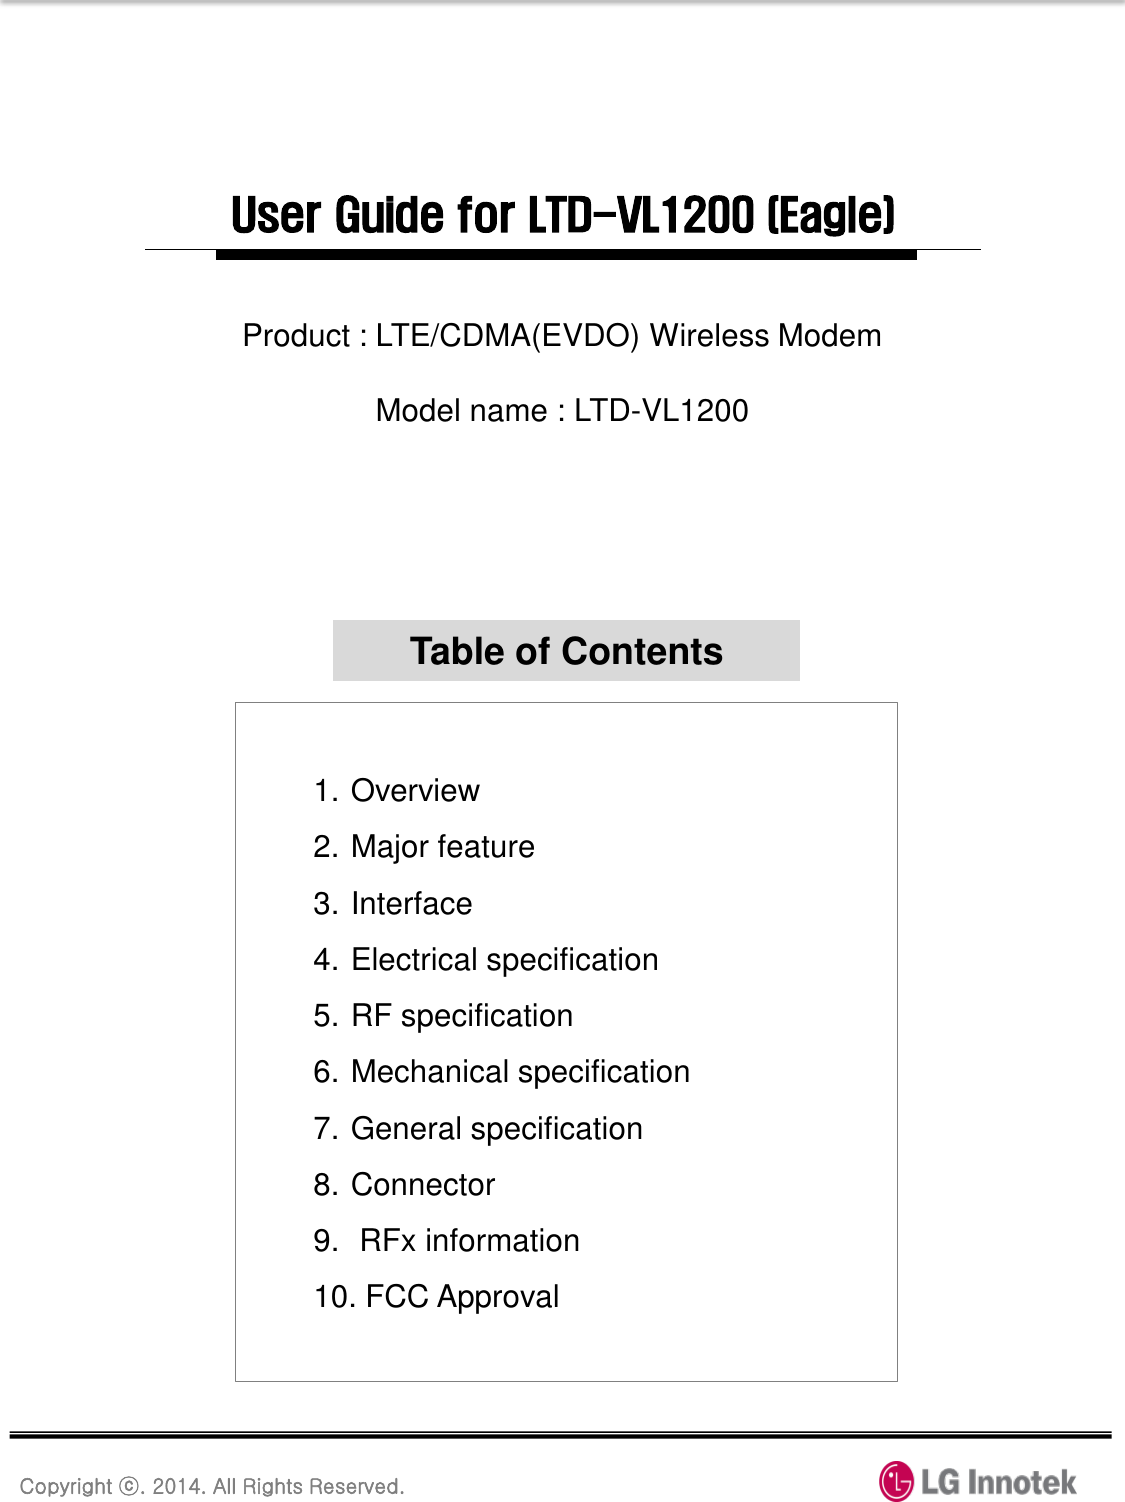 Copyright ⓒ. 2014. All Rights Reserved. User Guide for LTD-VL1200 (Eagle) 1. Overview 2. Major feature 3. Interface 4. Electrical specification 5. RF specification 6. Mechanical specification 7. General specification 8. Connector 9.  RFx information 10. FCC Approval Table of Contents Product : LTE/CDMA(EVDO) Wireless Modem  Model name : LTD-VL1200 